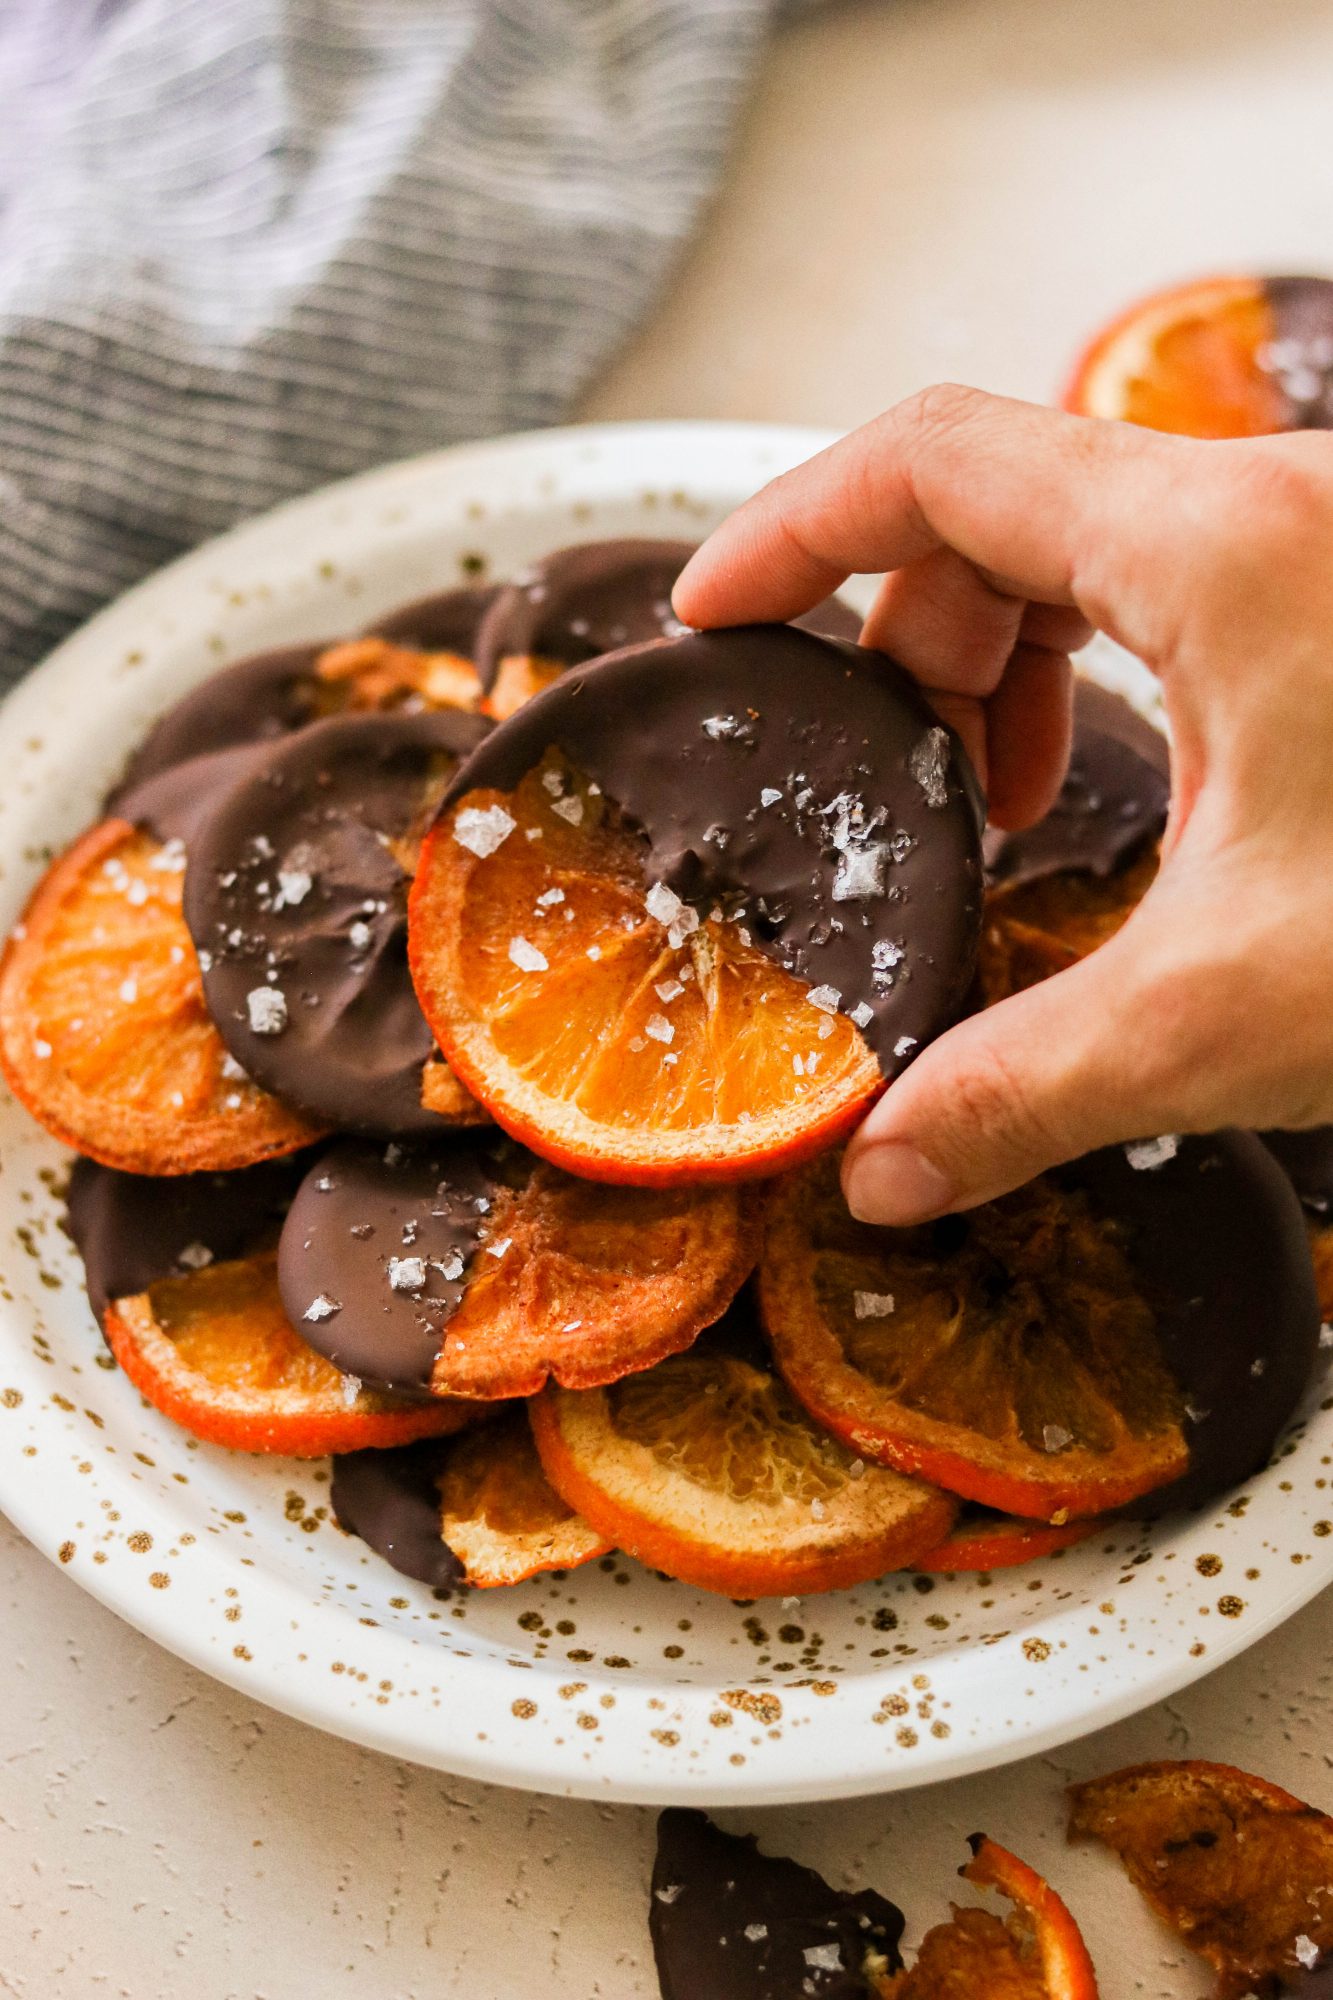 reaching for a dark chocolate covered orange slices on a plate